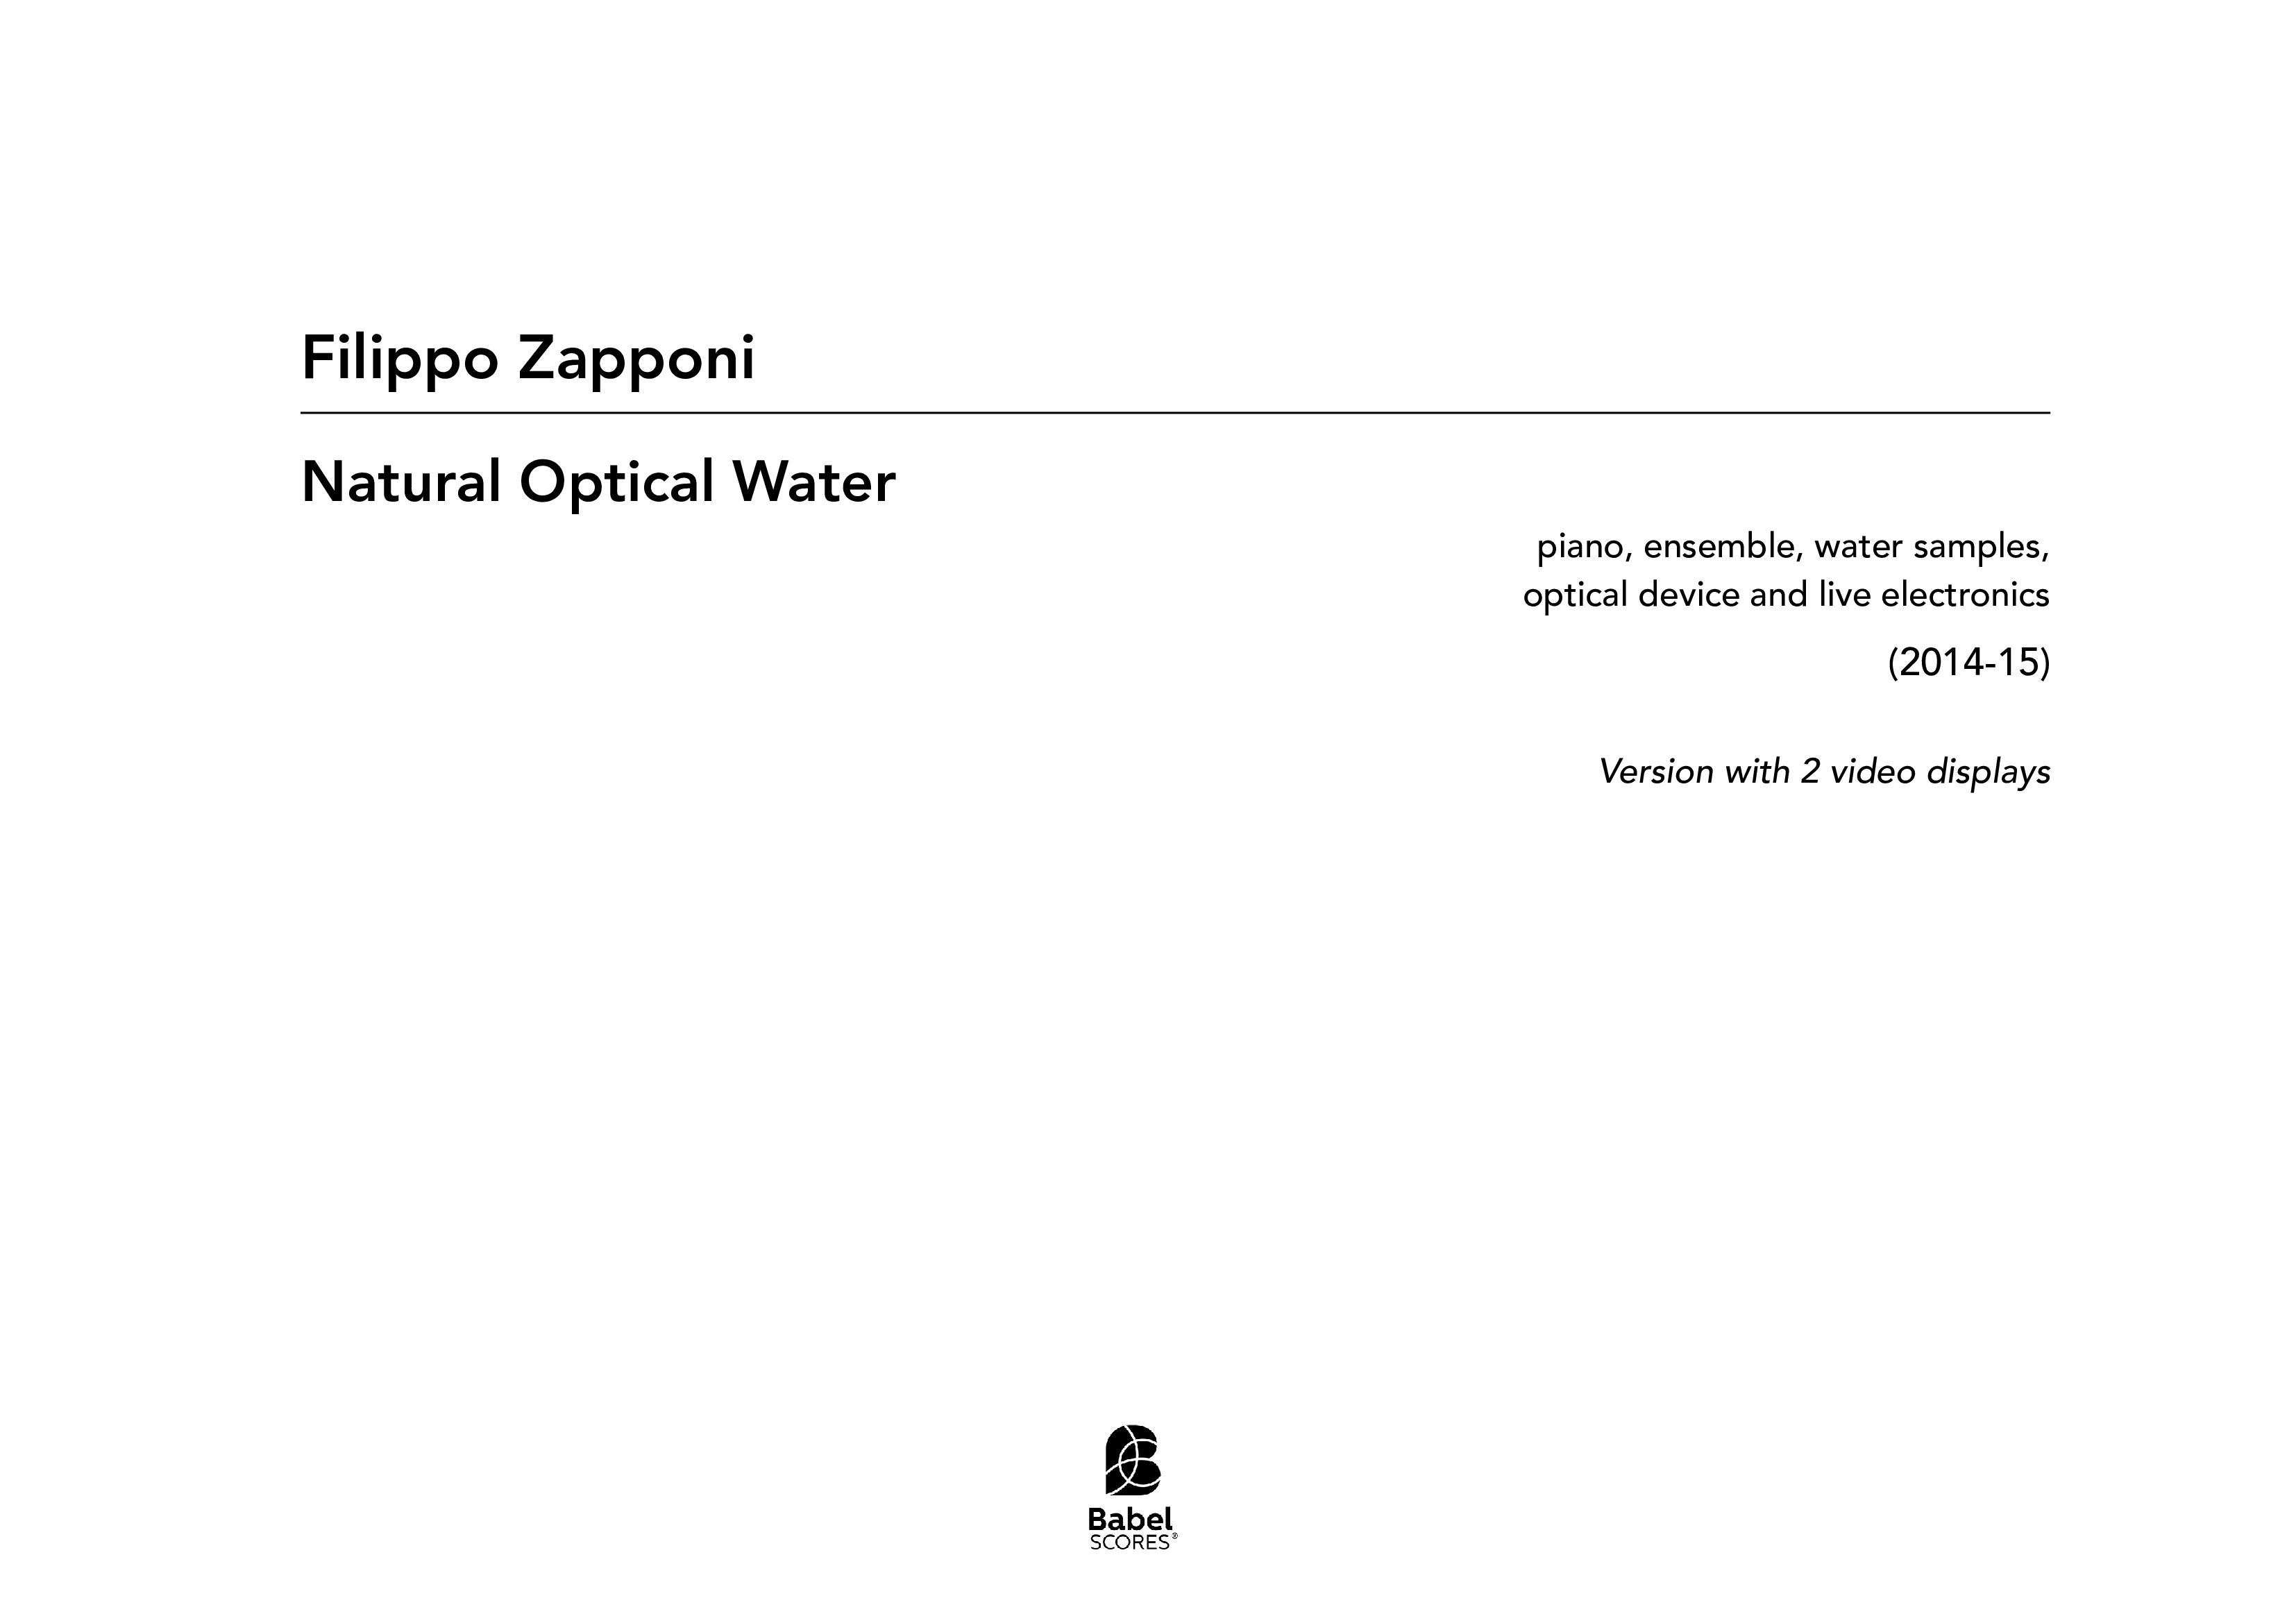 Natural Optical Water A3 z 3 90 1 105